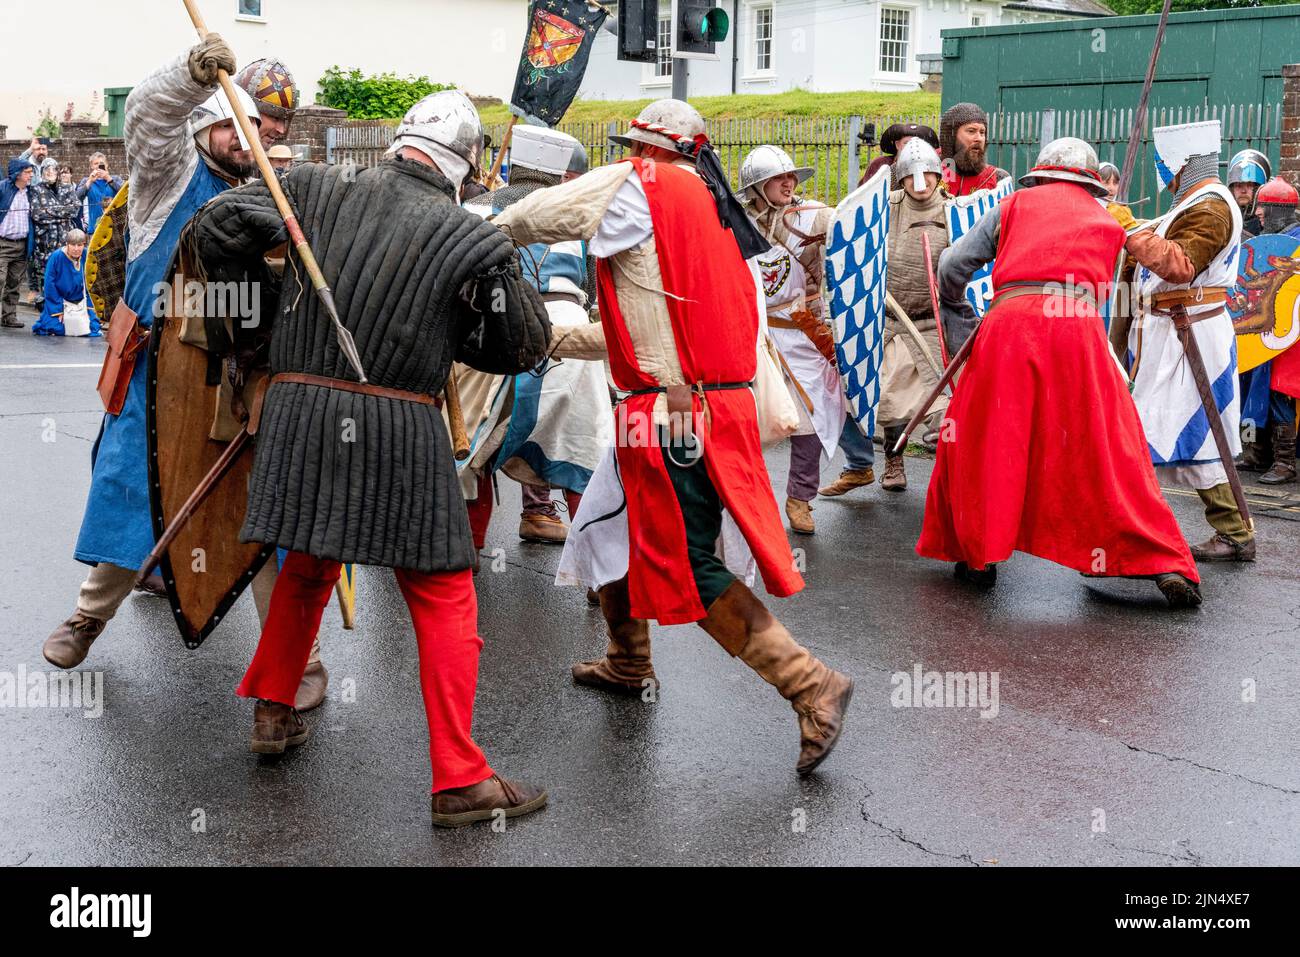 People Dressed In Medieval Costume Take Part In A Re-Enactment Of The 13th Century Battle Of Lewes, Lewes, East Sussex, UK. Stock Photo